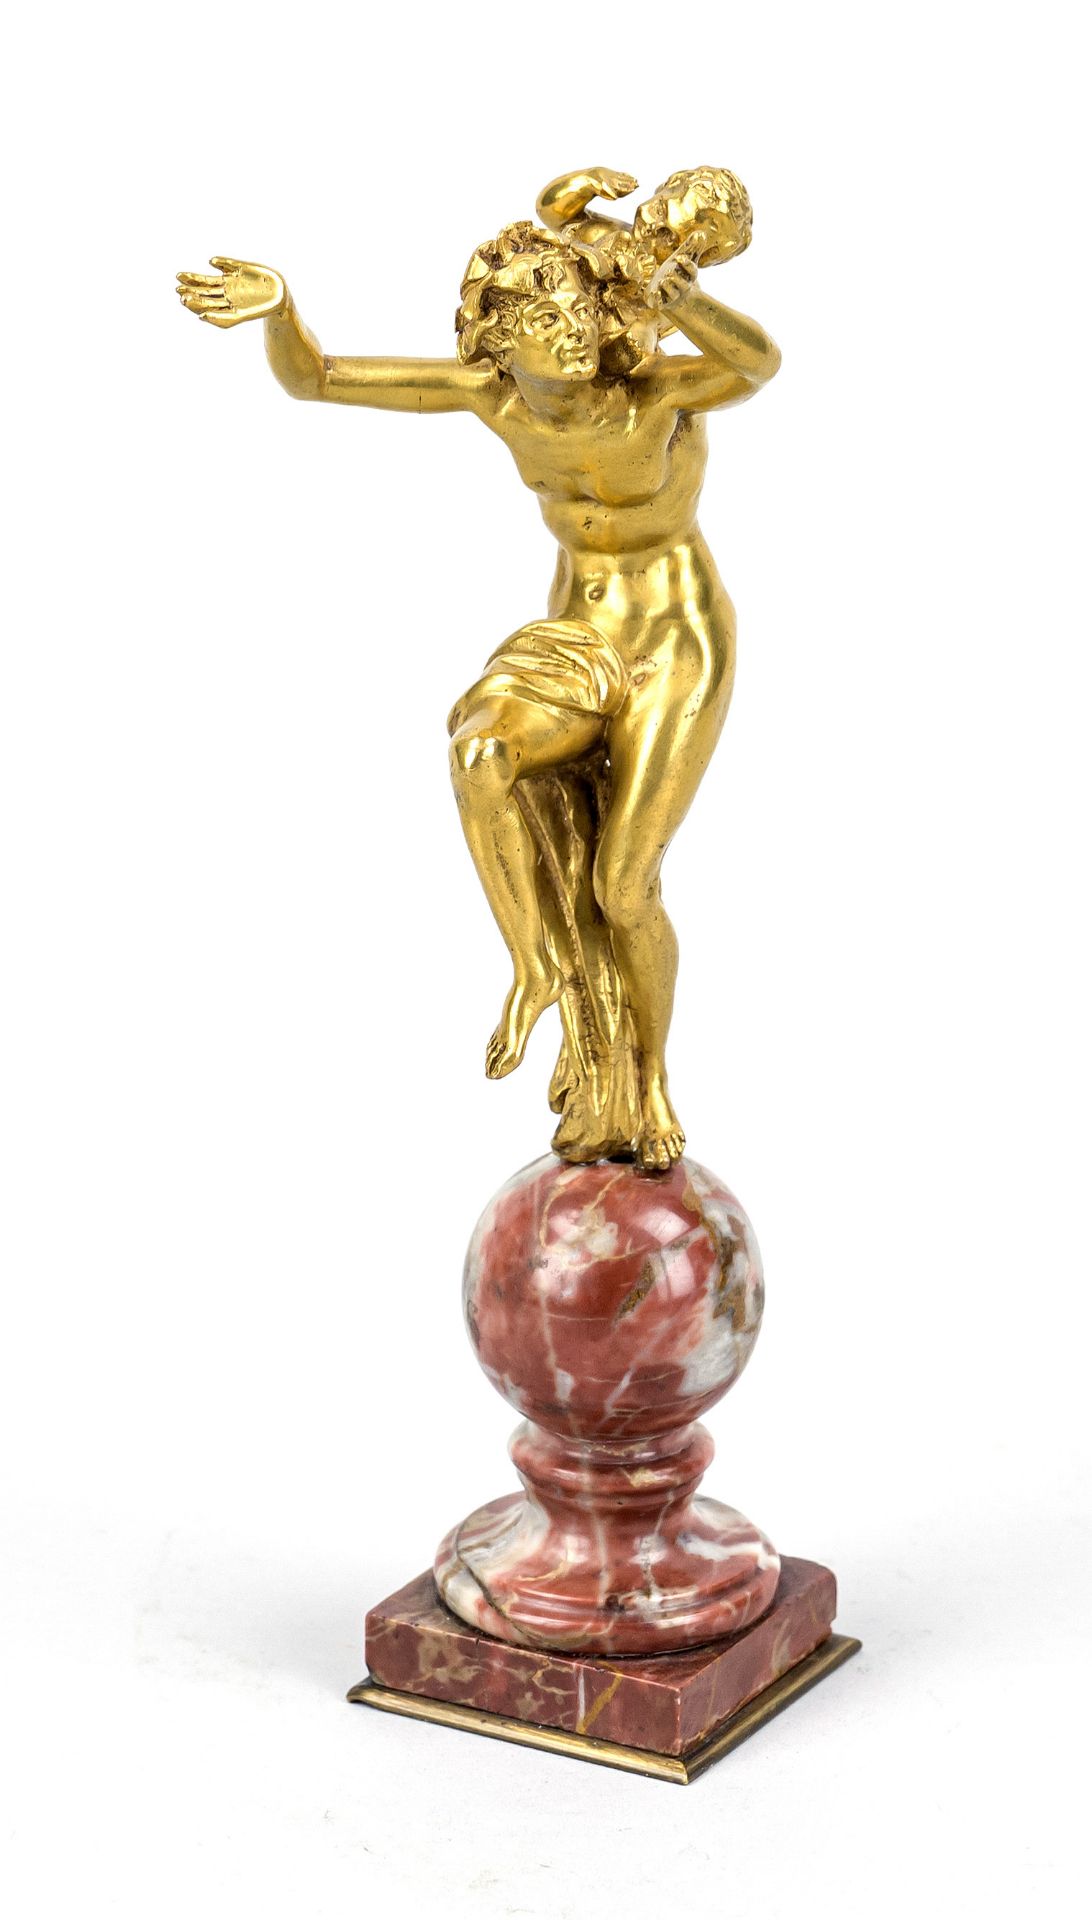 French sculptor, c. 1800, dancing bacchant with a boy on his shoulders, gilt bronze, on a reddish